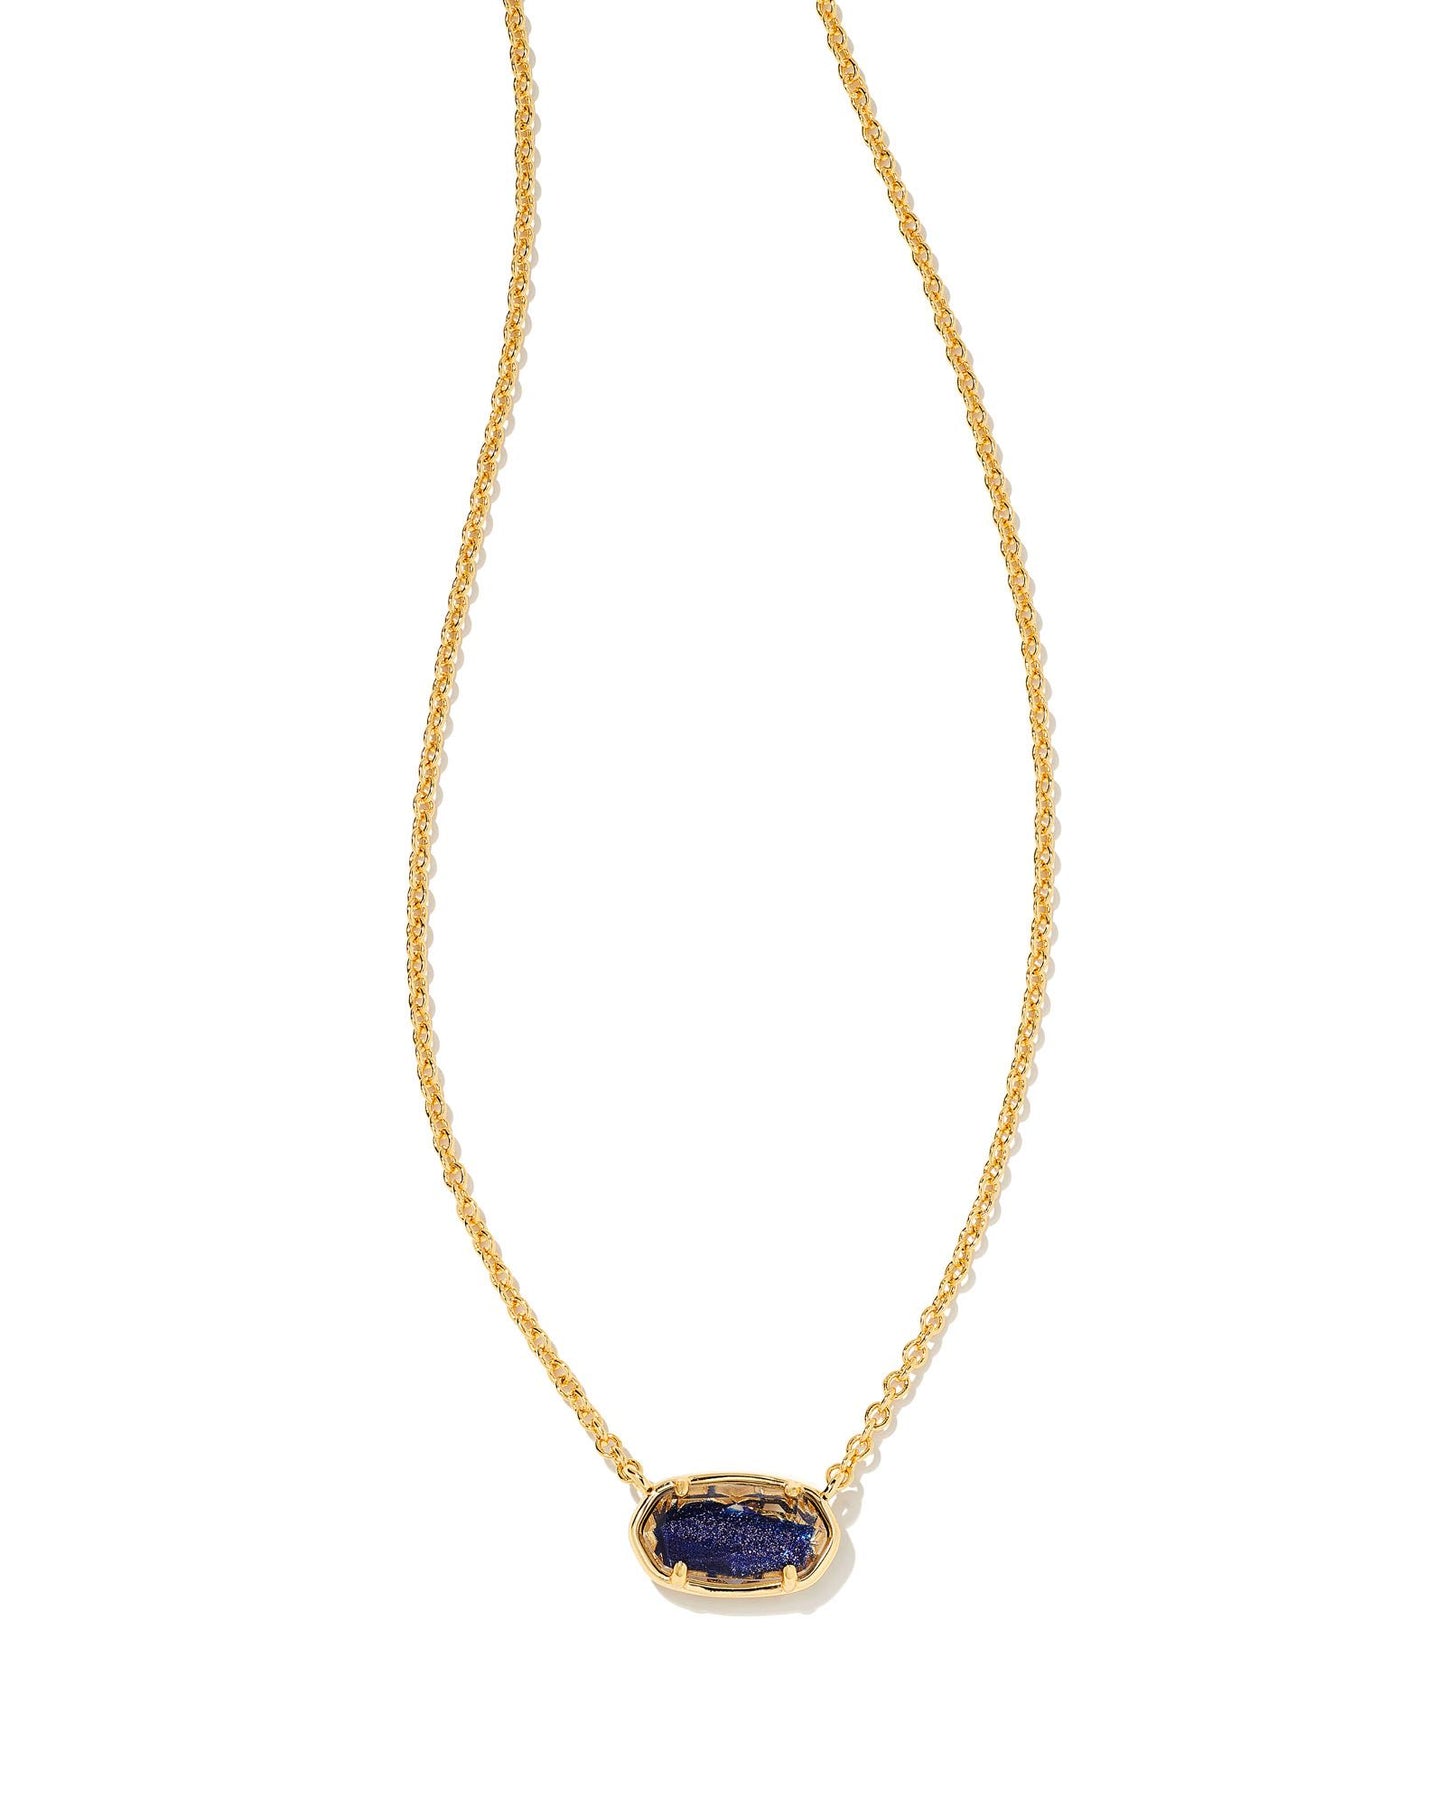 Grayson Short Necklace | Navy Dusted Glass